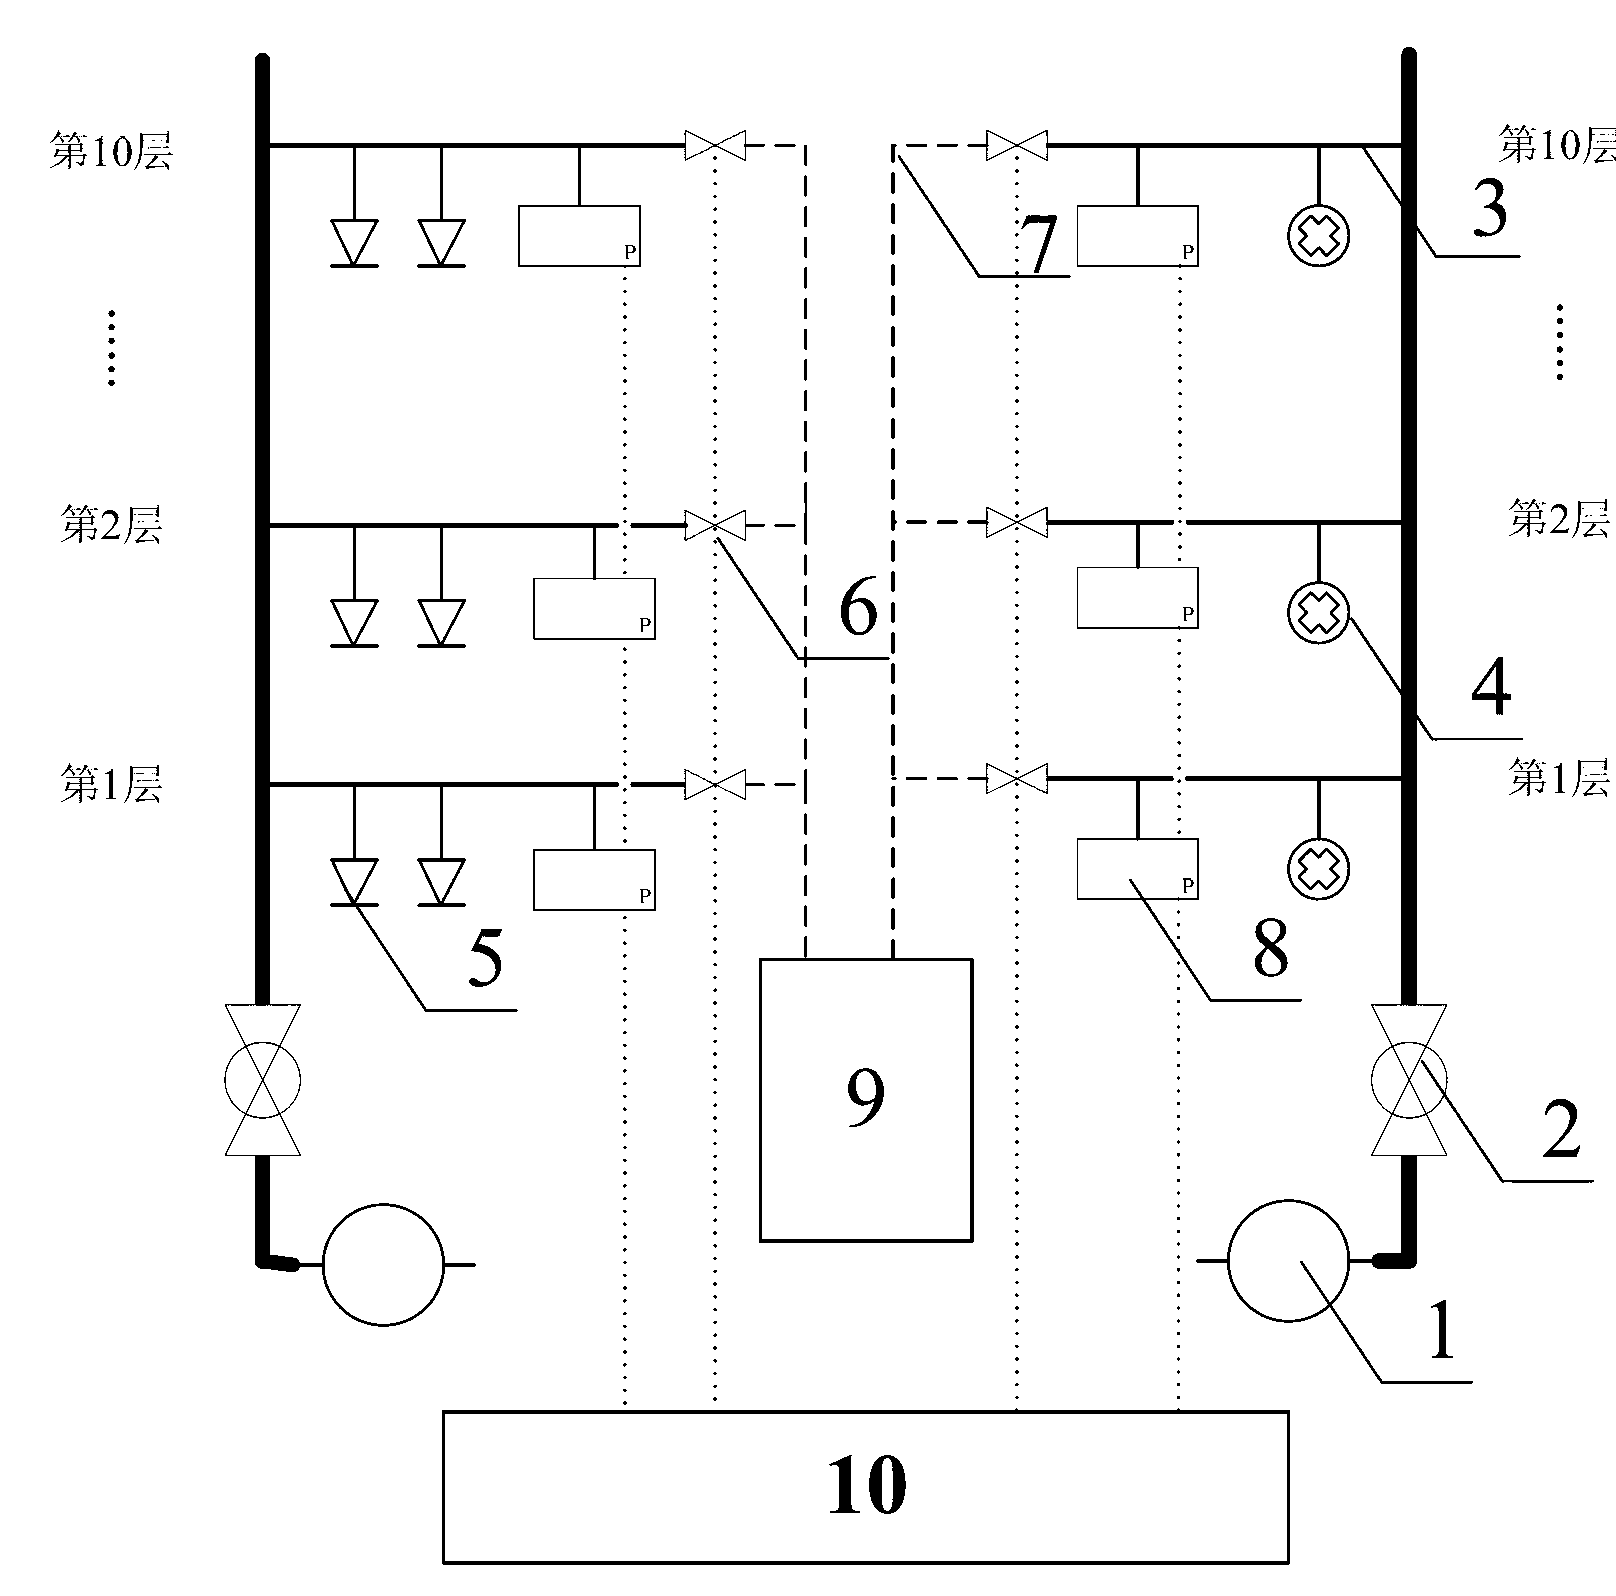 Real-time monitoring system and method for fire water supply system of building